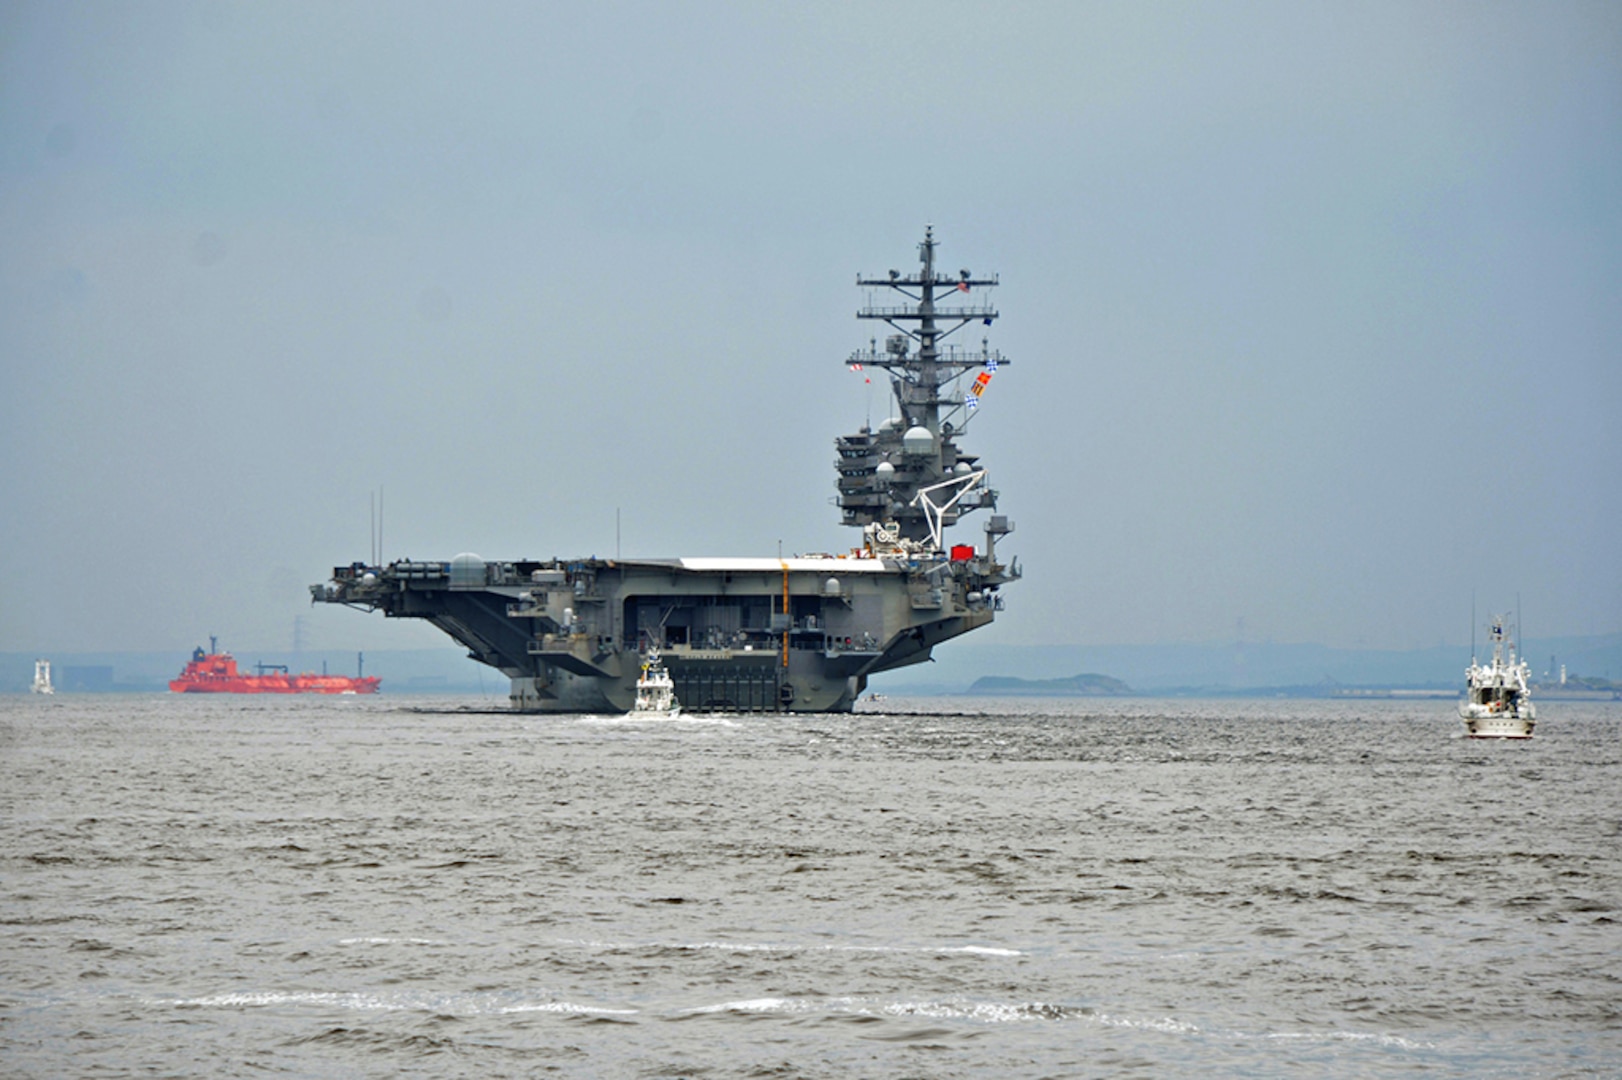 The U.S. Navy's forward-deployed aircraft carrier, USS Ronald Reagan (CVN 76), departs Fleet Activities (FLEACT) Yokosuka for its 2017 patrol. FLEACT Yokosuka provides, maintains, and operates base facilities and services in support of 7th Fleet's forward-deployed naval forces, 71 tenant commands, and 26,000 military and civilian personnel, May 16, 2017. 